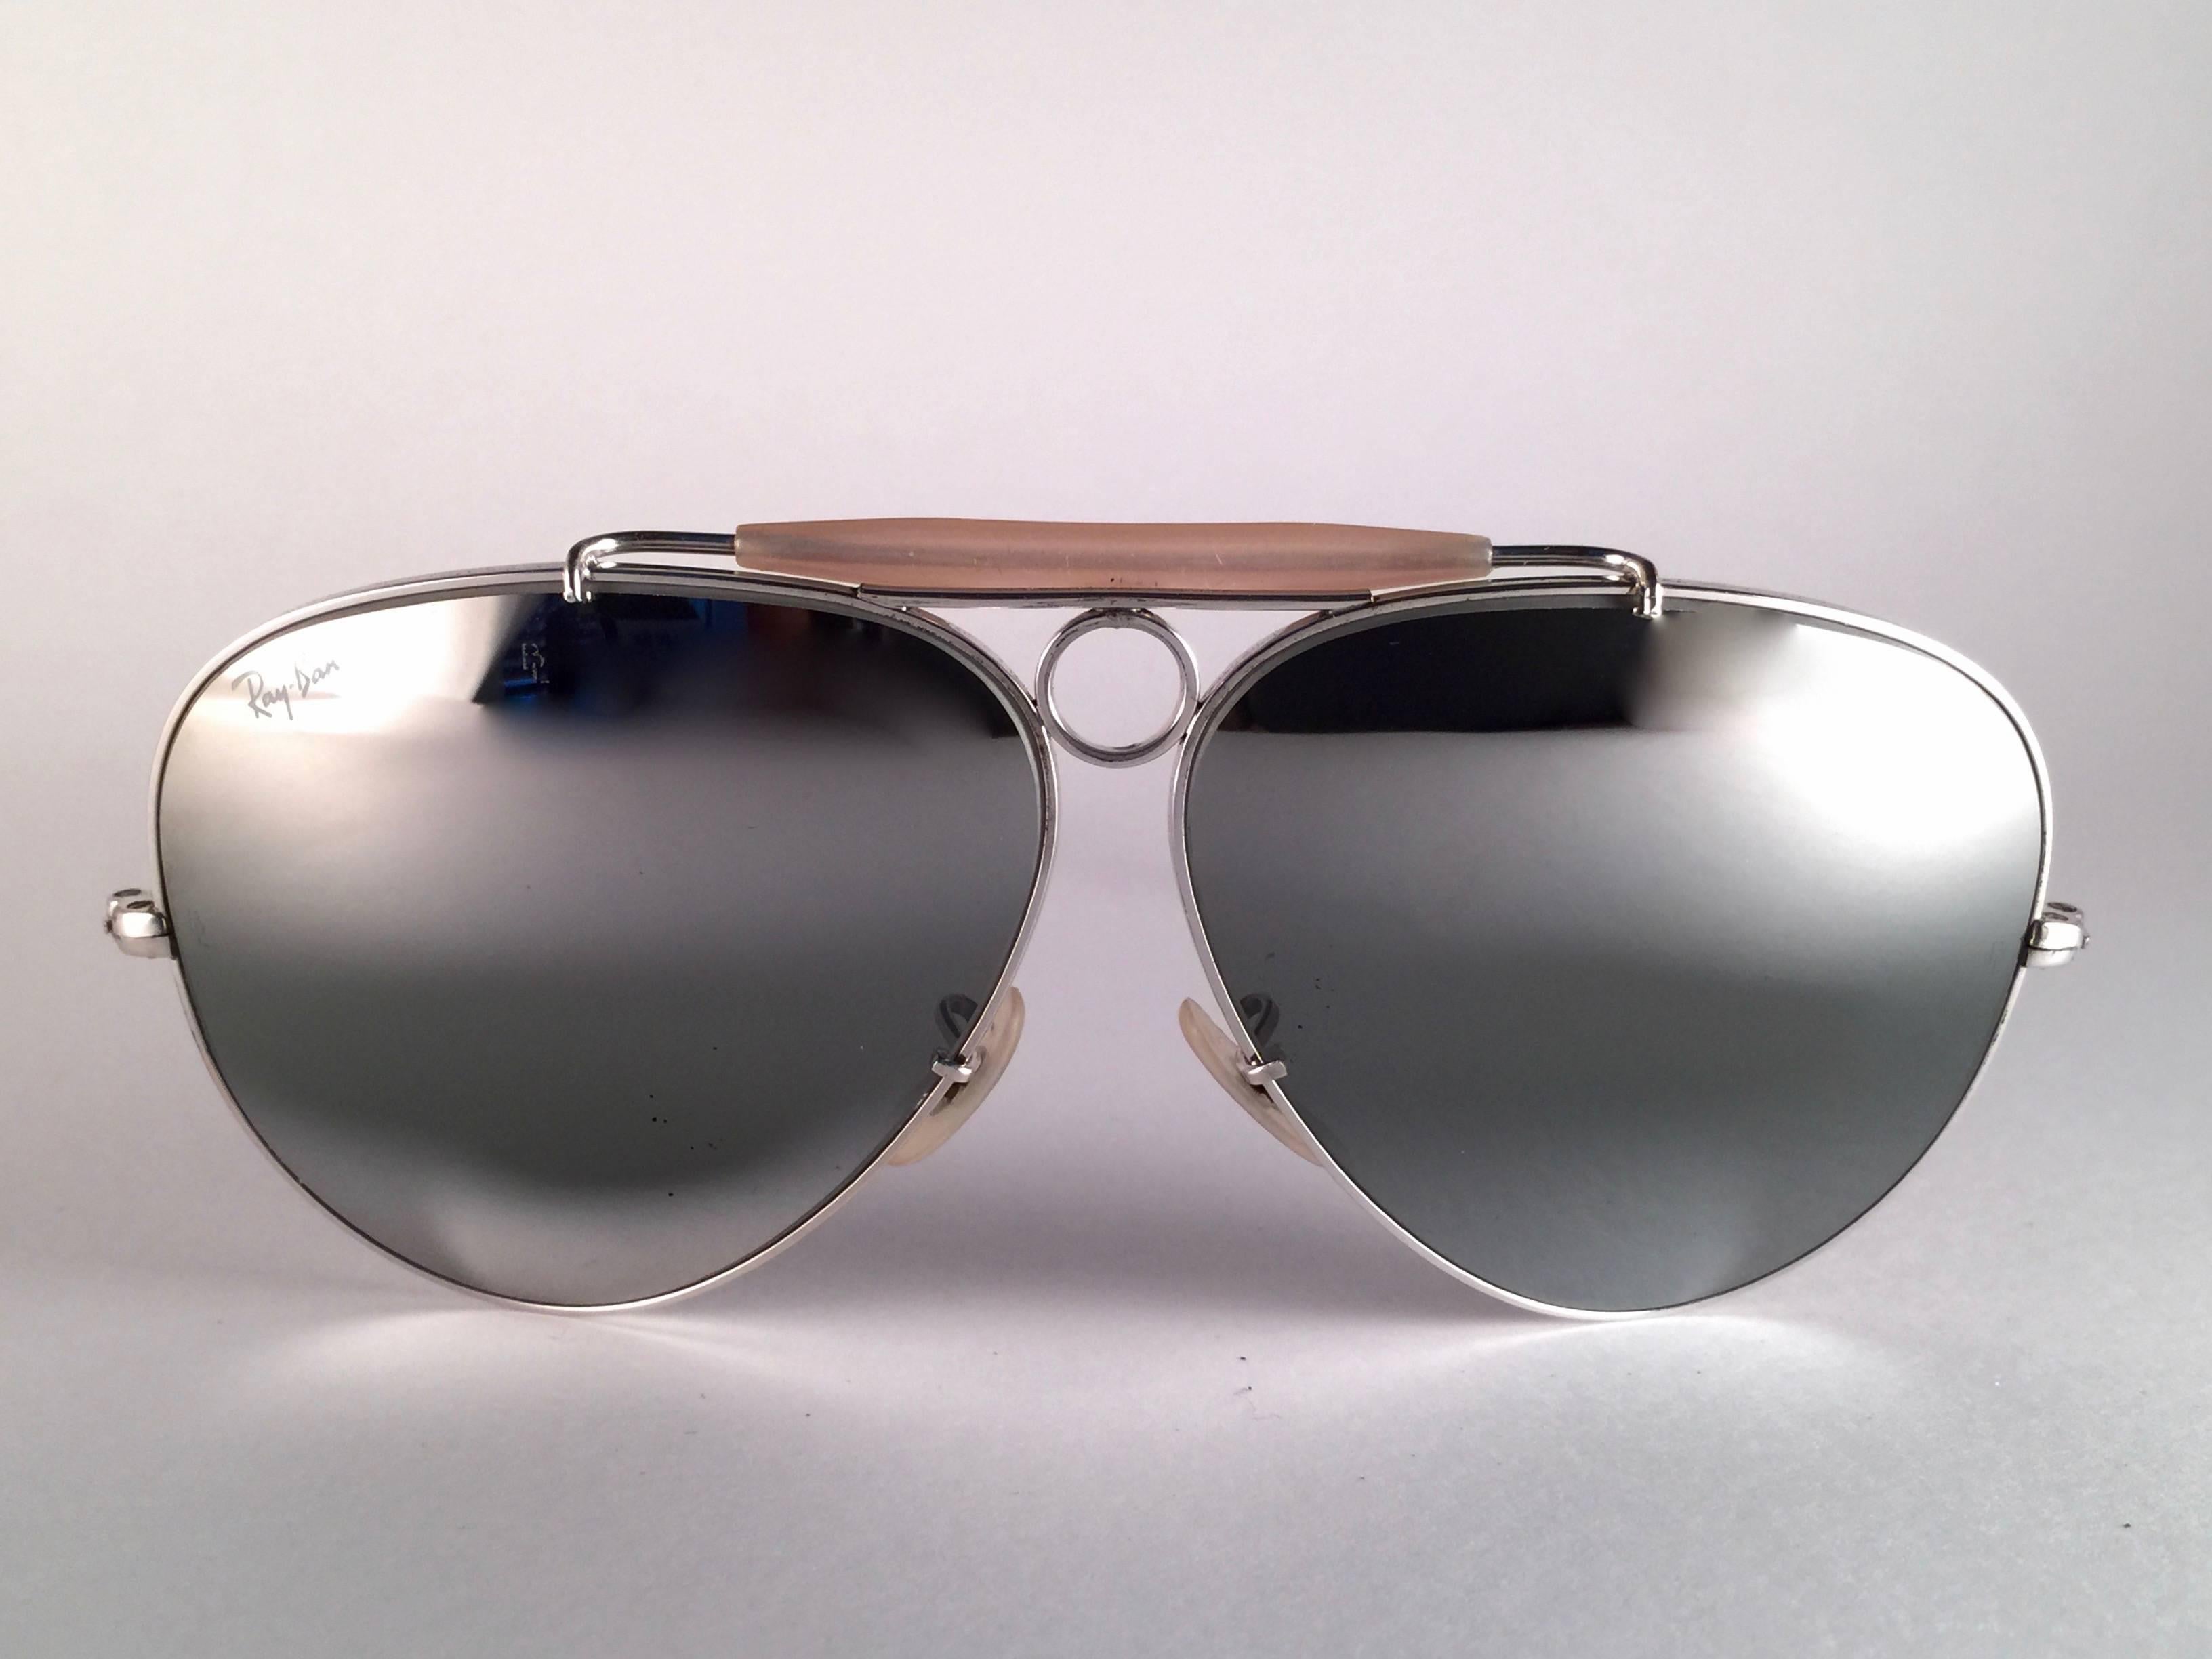 New Vintage Ray Ban Shooter White Gold 62mm with double mirror lenses.  B&L etched twice in both lenses.  
Please notice this item may show minor sign of wear due to storage.
Comes with its original Ray Ban B&L case.  
A seldom piece in new, never